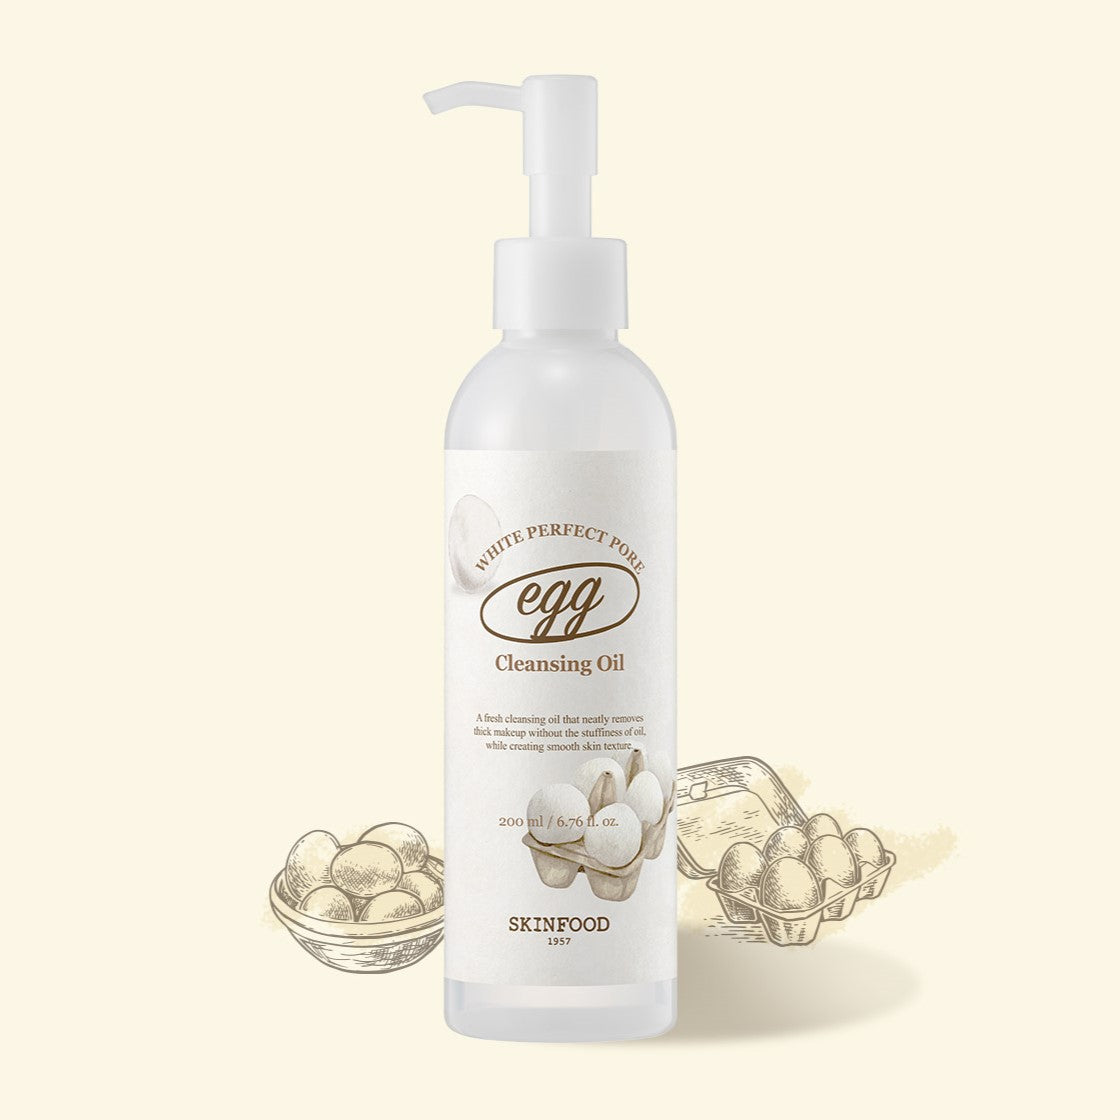 SKINFOOD Egg White Perfect Pore Cleansing Oil 200ml on sales on our Website !